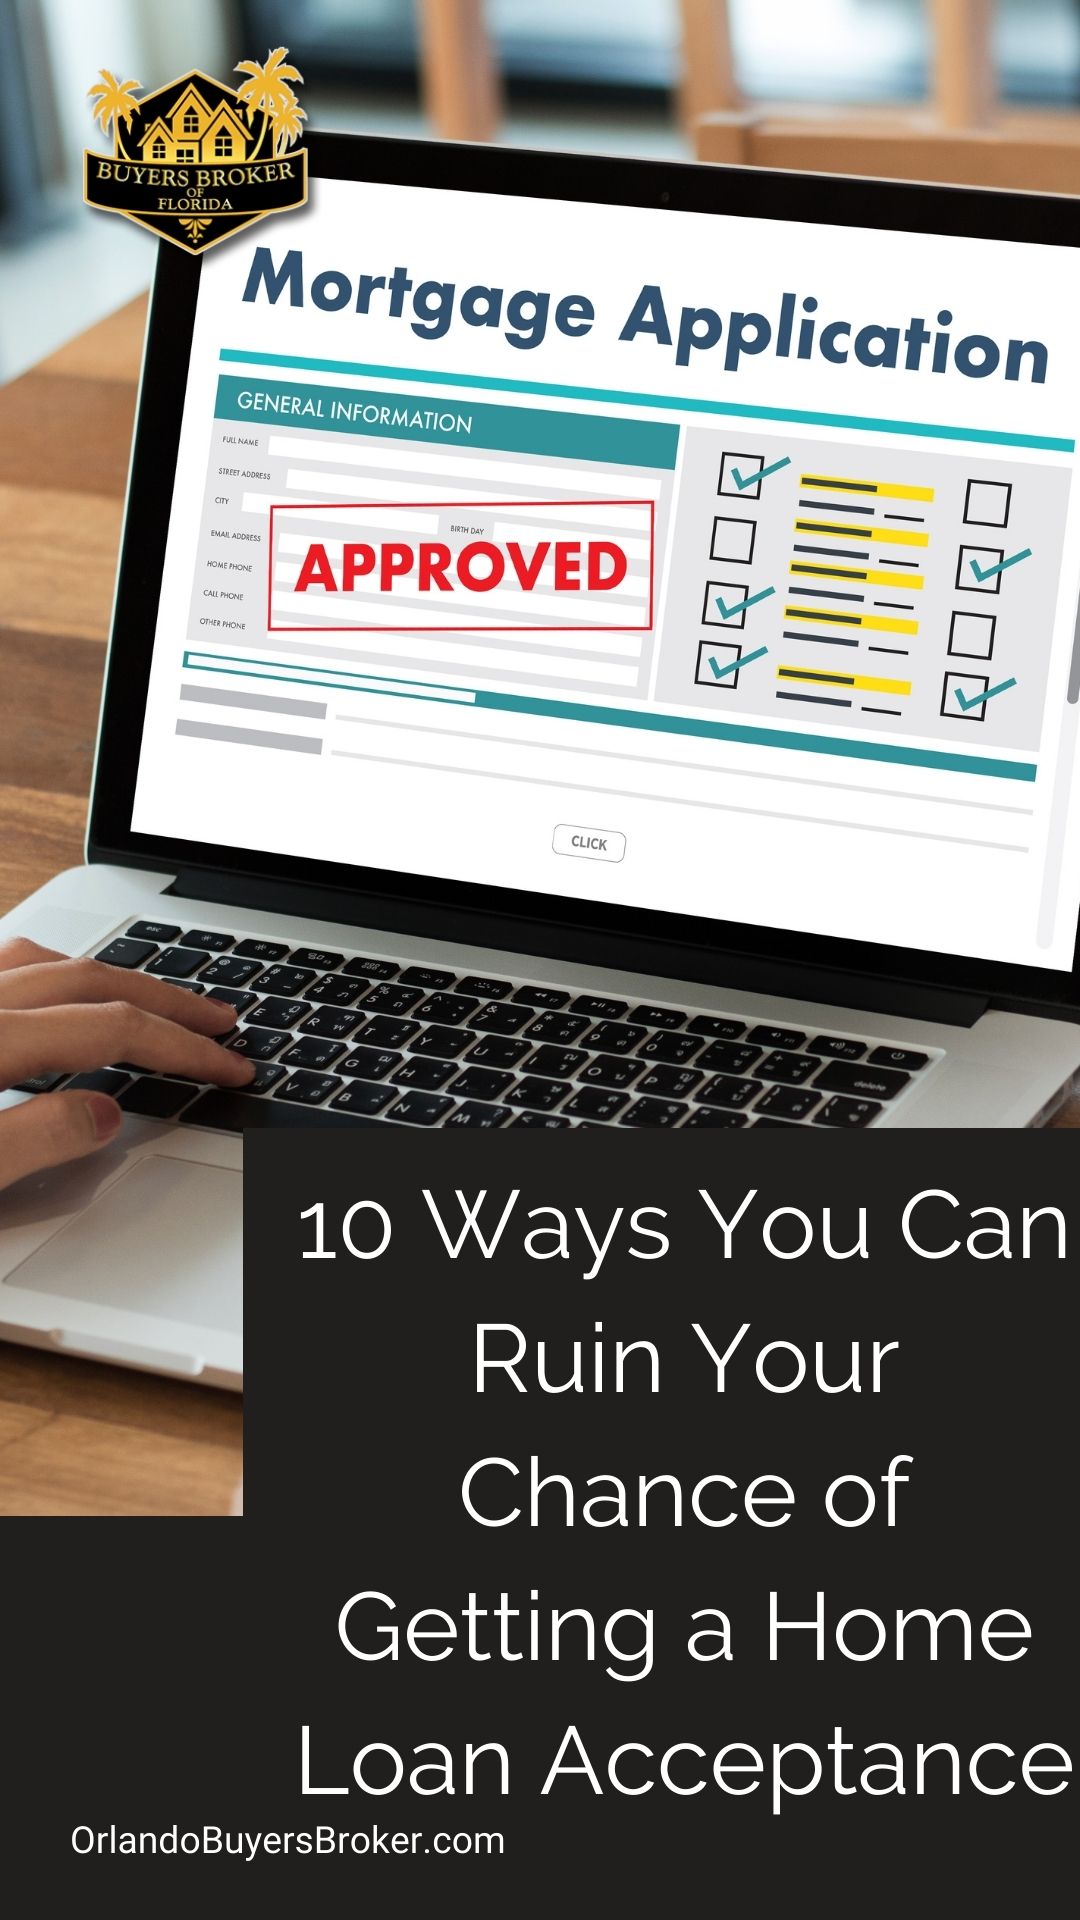 10 Ways You Can Ruin Your Chance of Getting a Home Loan Acceptance